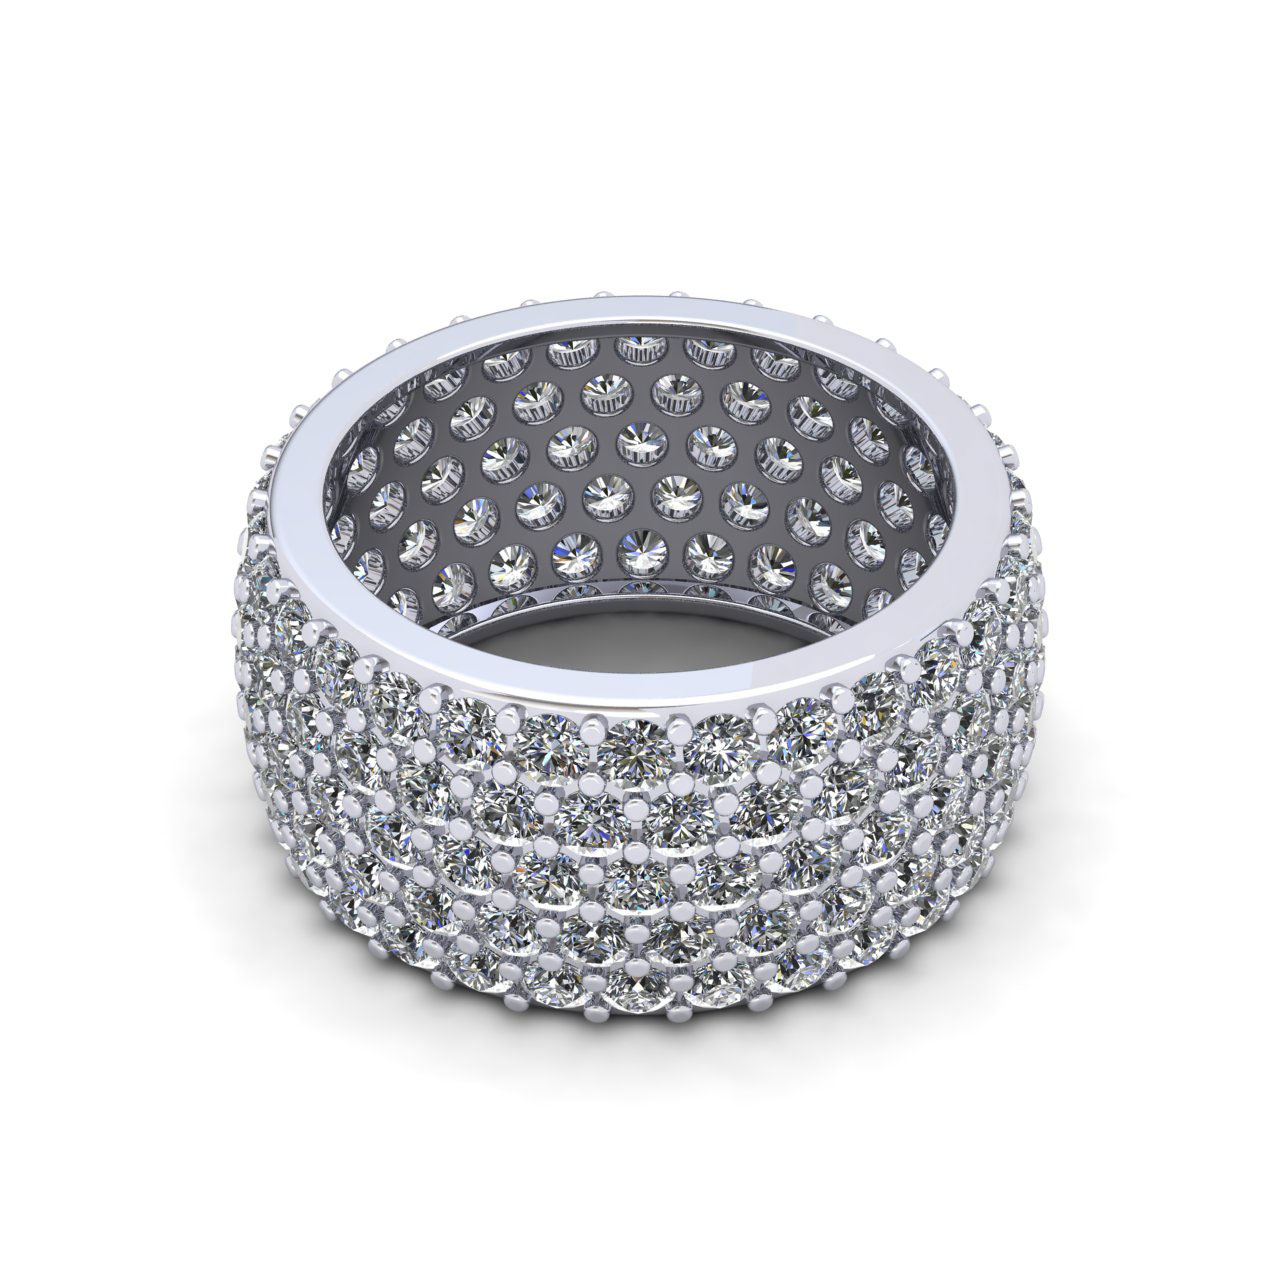 Jewel We Sell Natural 5.00Ct Round Brilliant Cut Diamond Wide Pave Ladies Anniversary Wedding Eternity Band Ring Solid 10k White Gold G-H I1